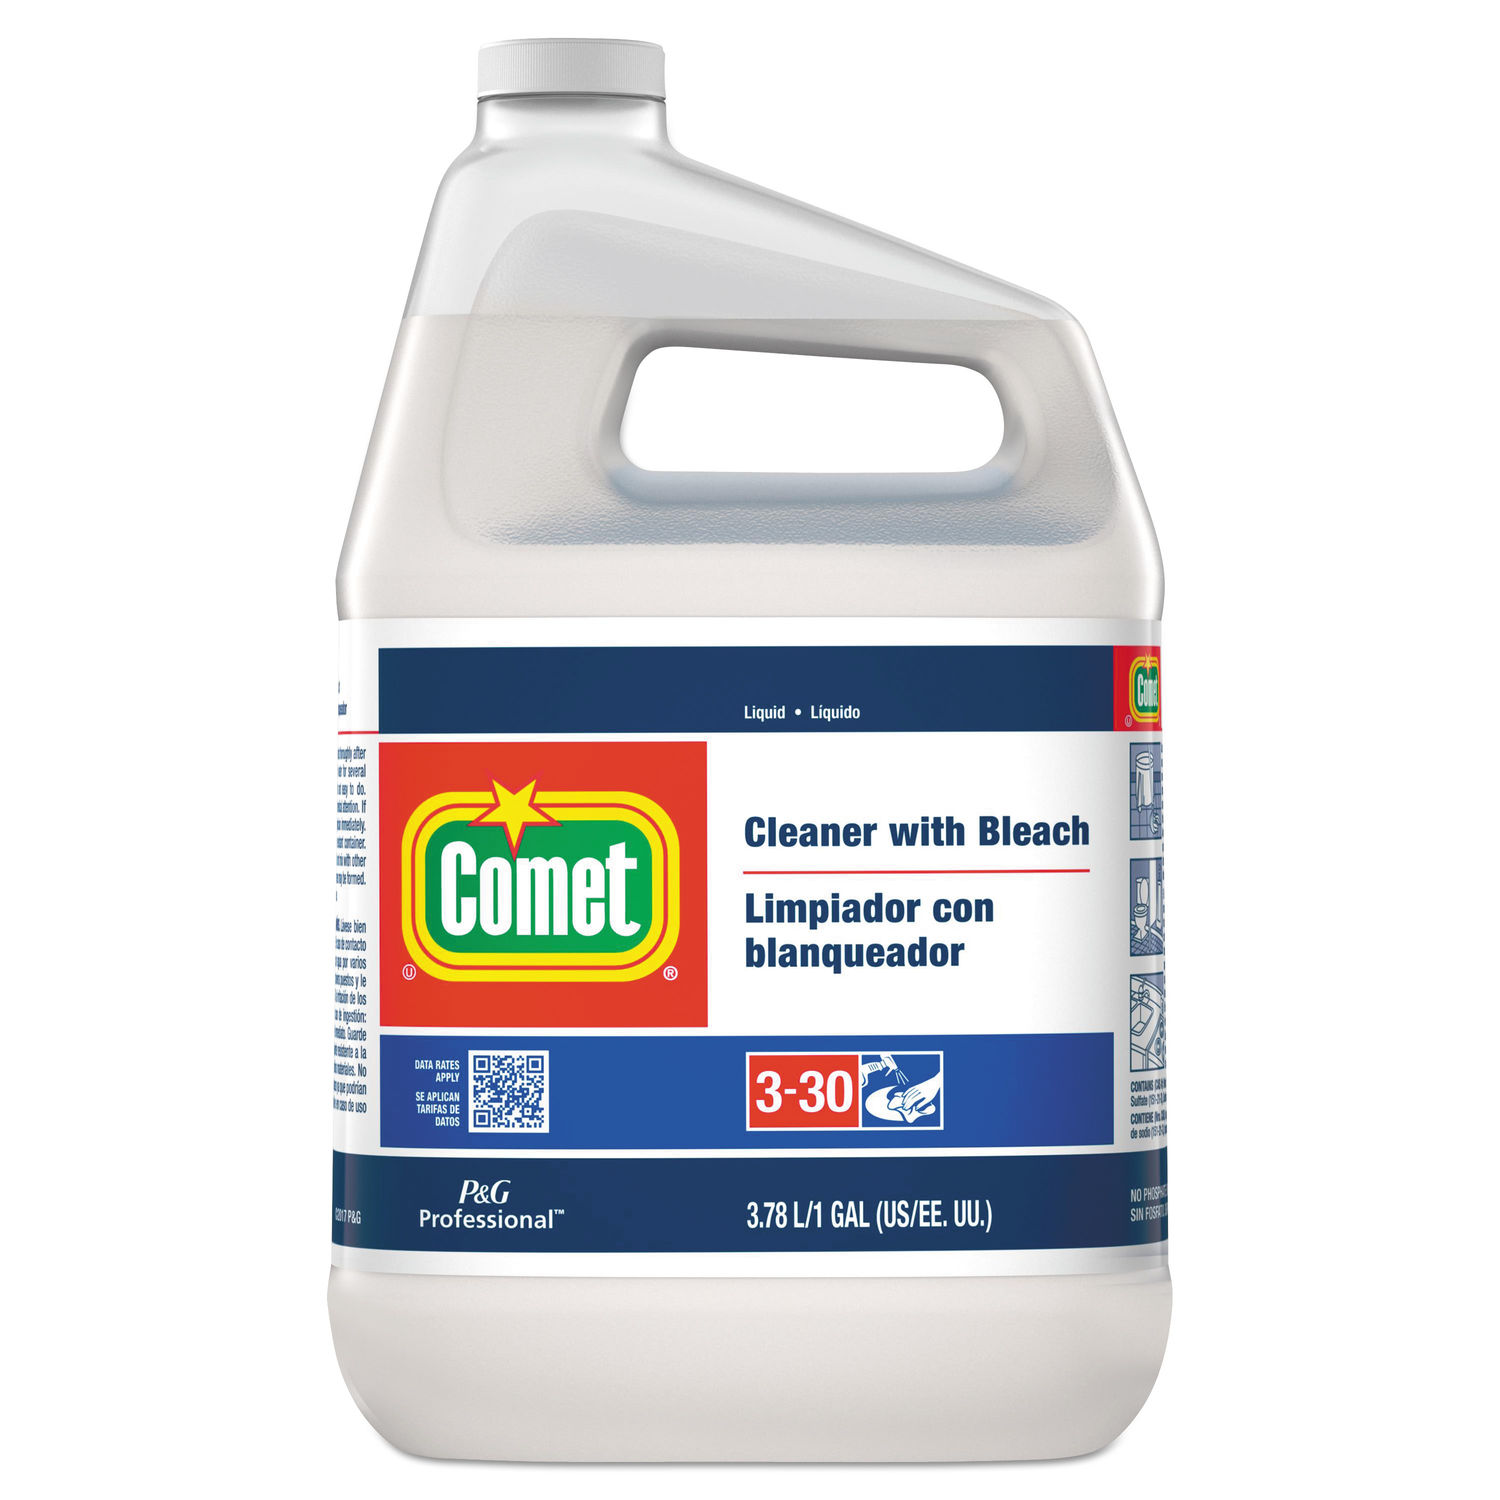 Cleaner with Bleach Liquid, One Gallon Bottle